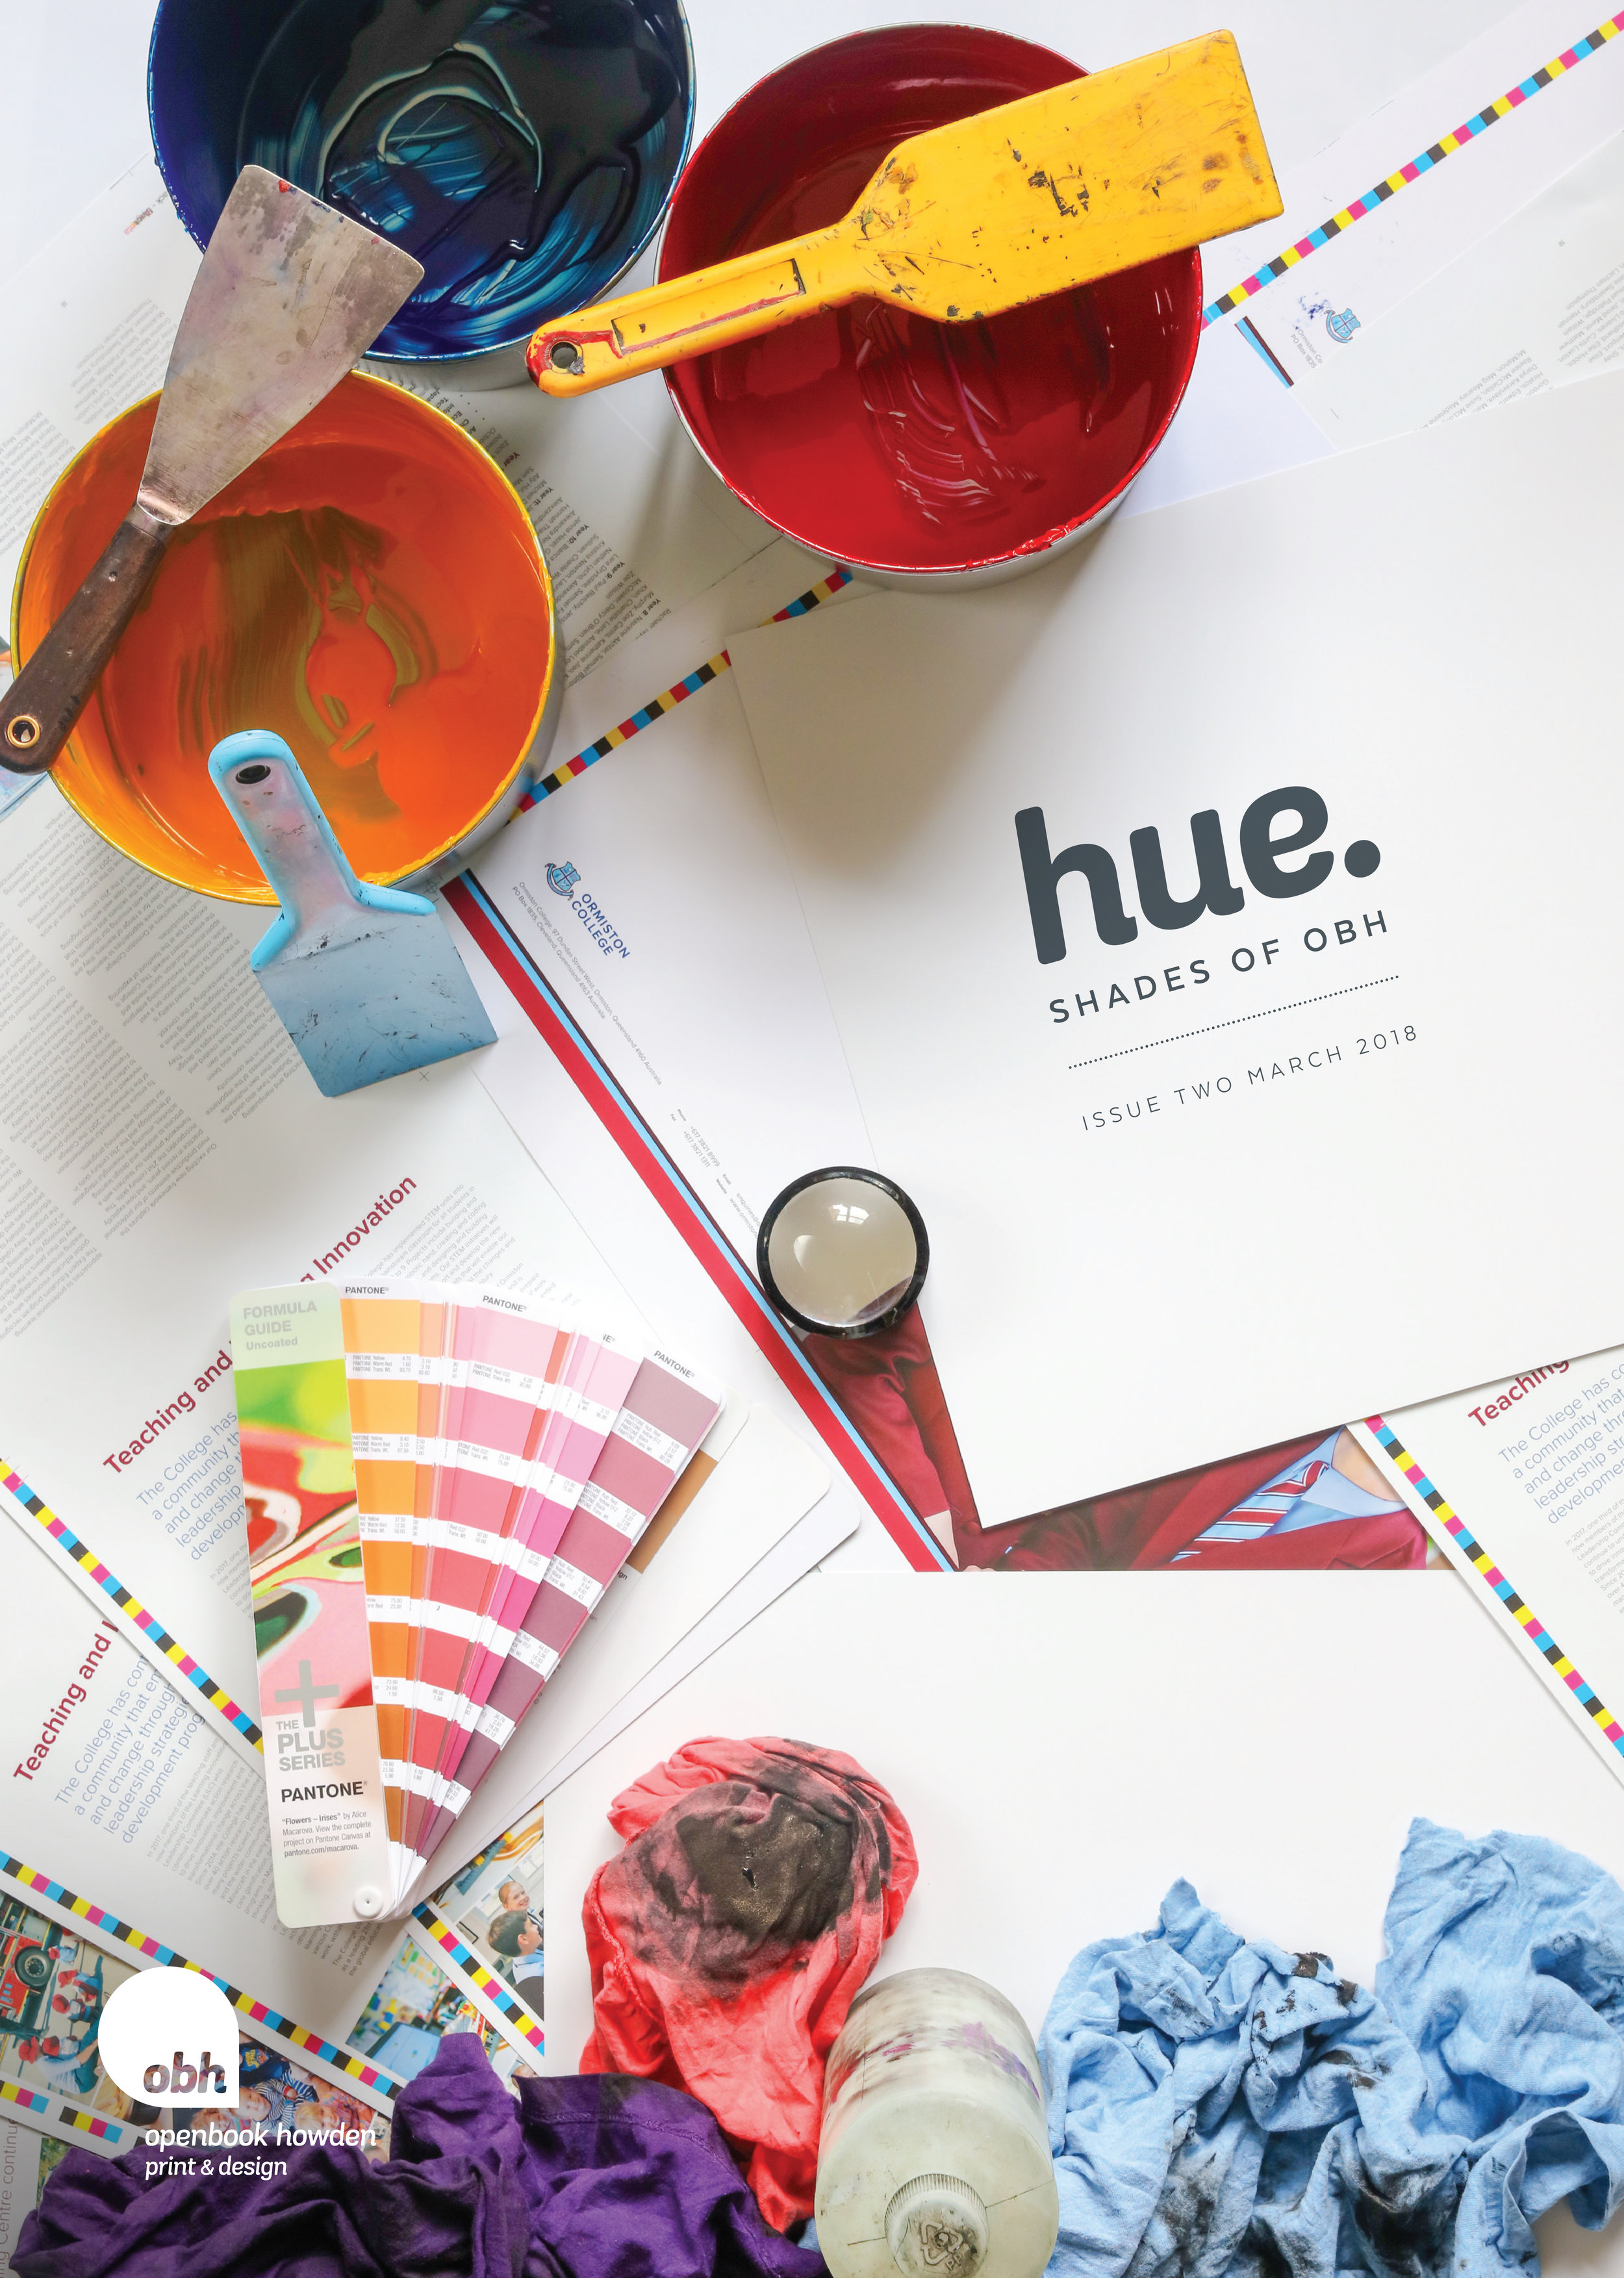 Openbook Howden's Hue magazine cover.